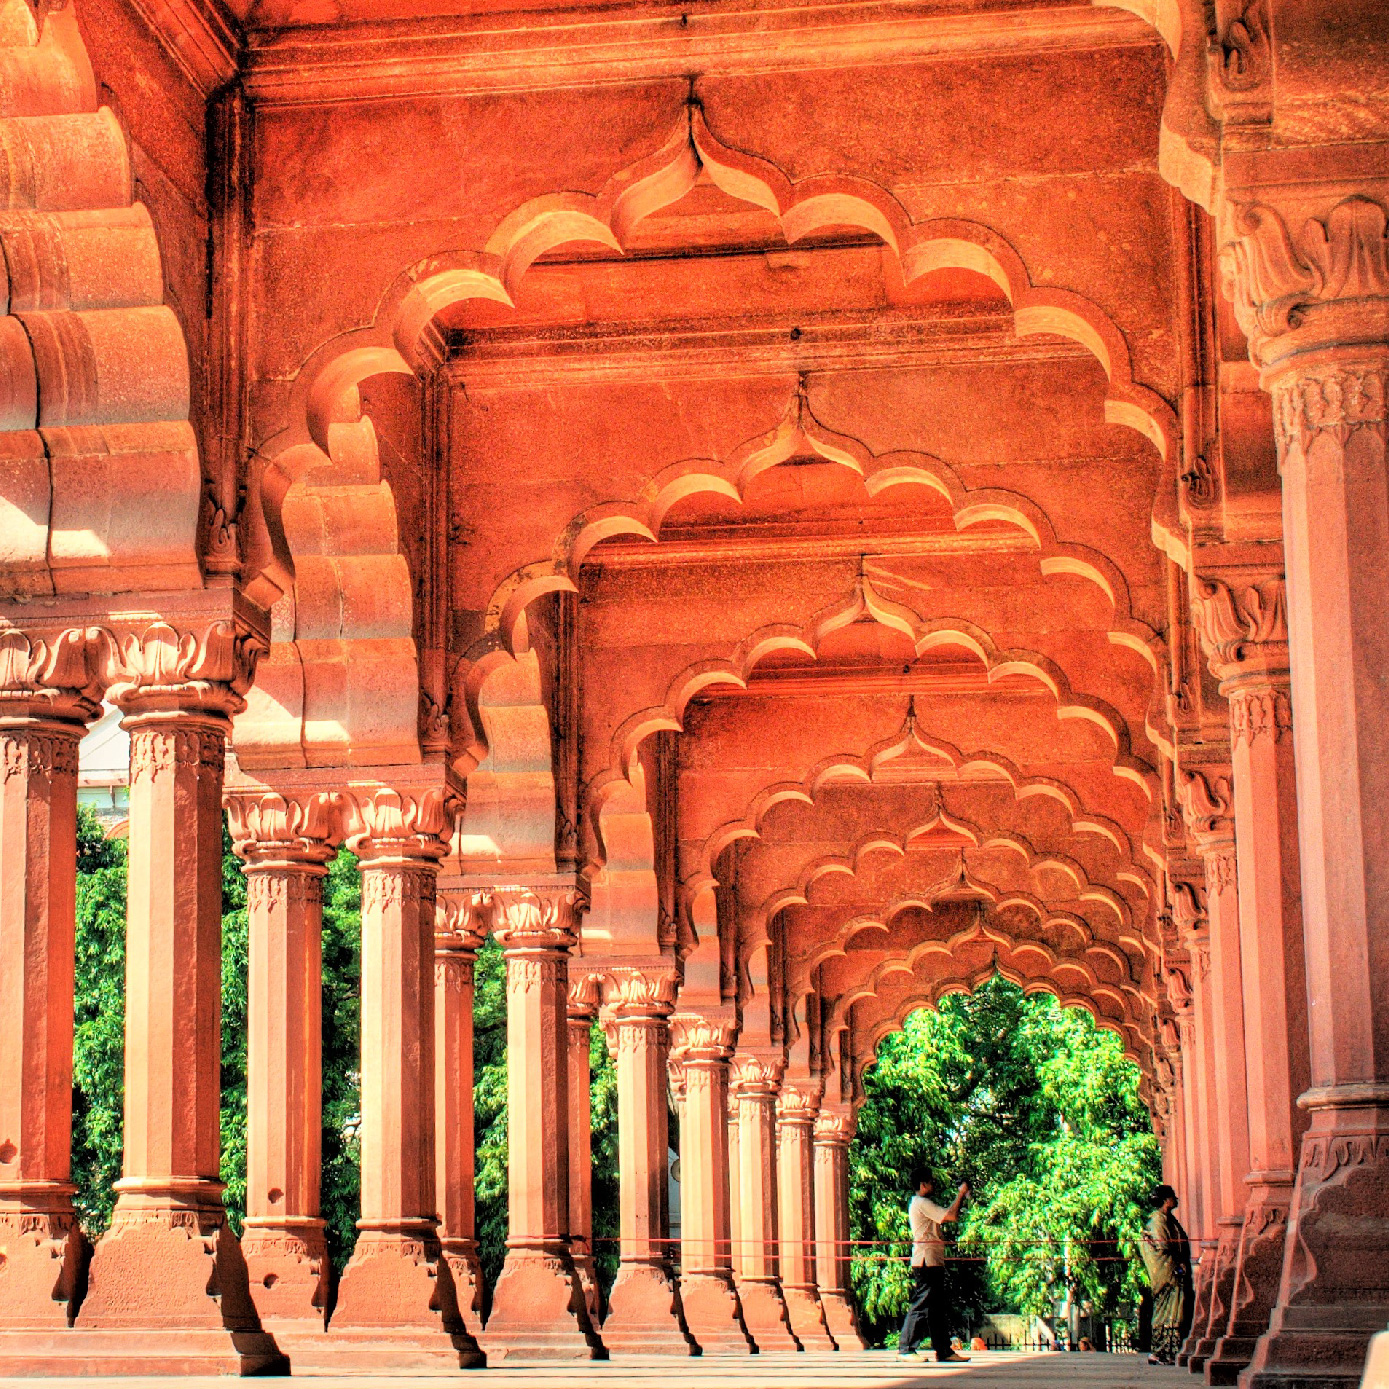 Explore India with these special rates and packages. This program is based on a special offer from Oberoi Hotels.